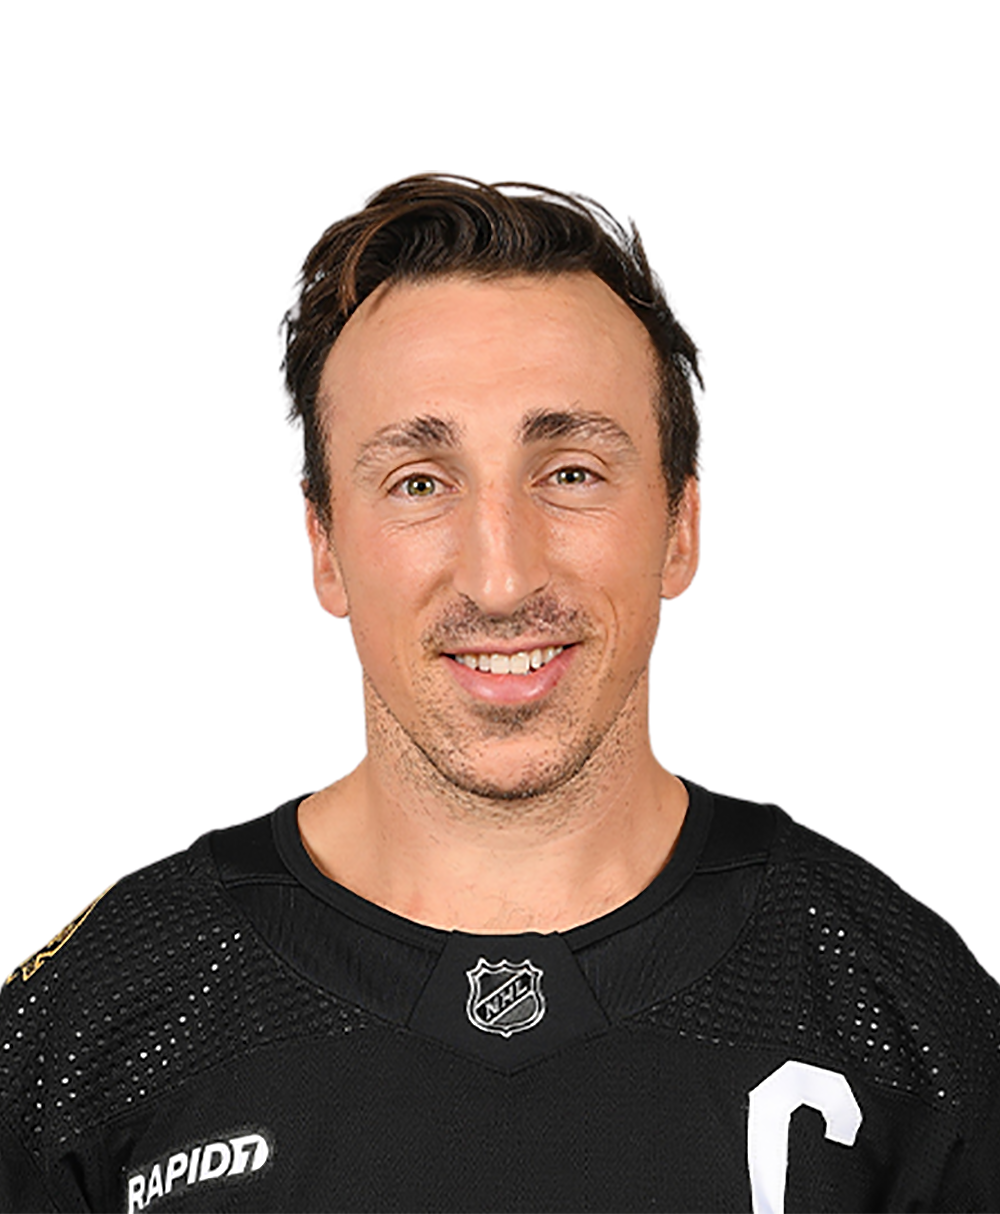 Brad Marchand's Newest Award, A Callback To His Journey To The NHL